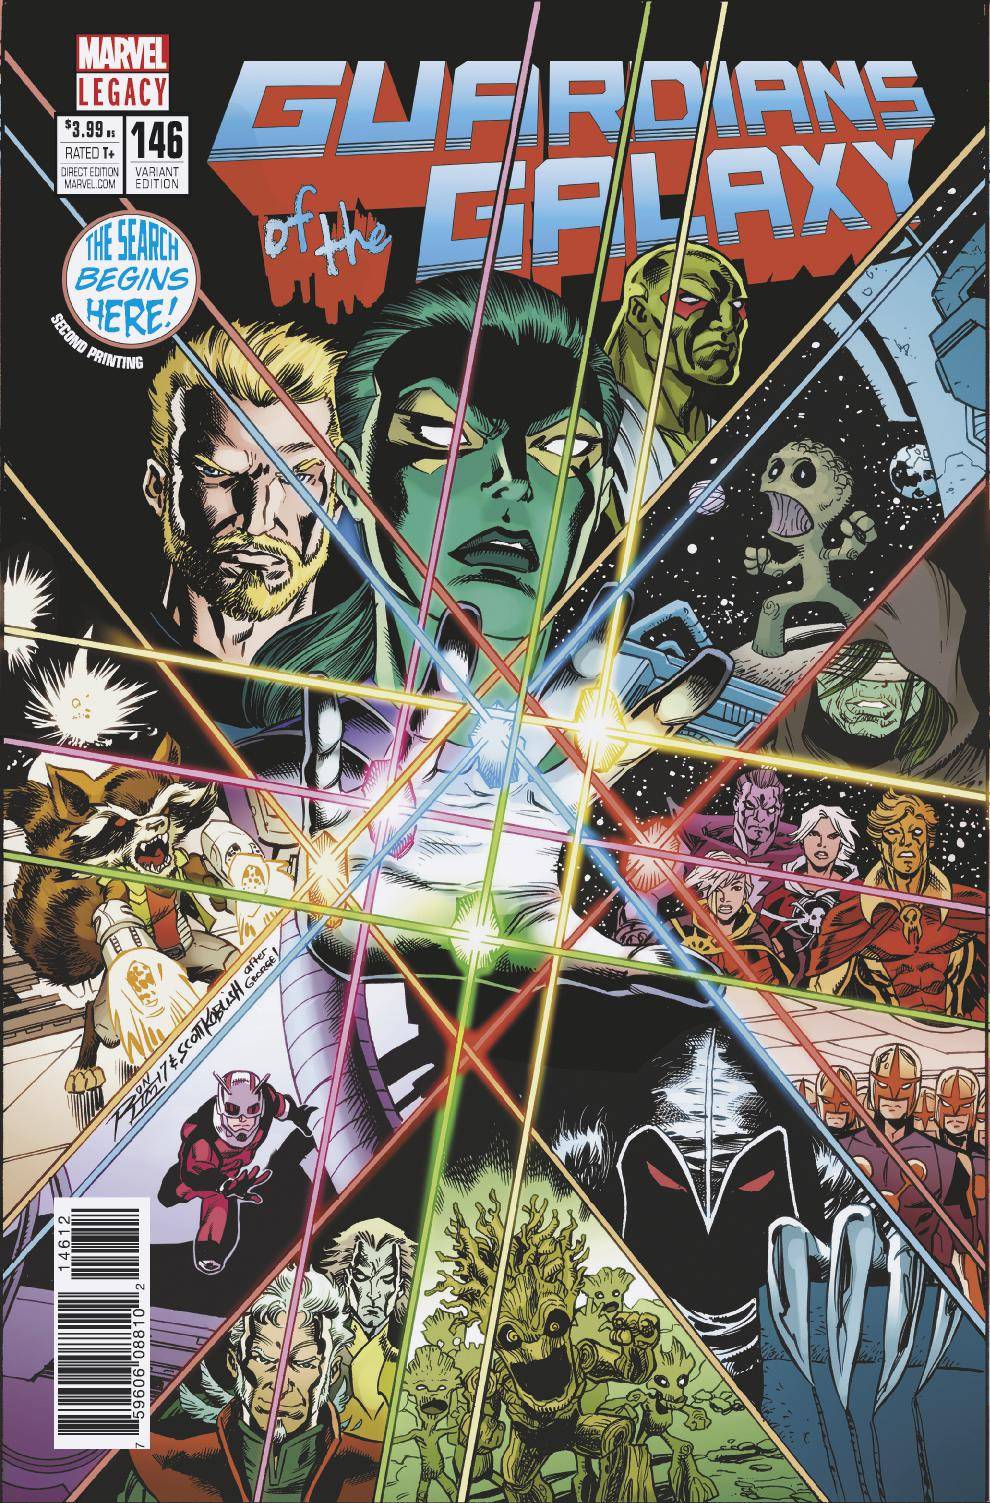 GUARDIANS OF THE GALAXY#146